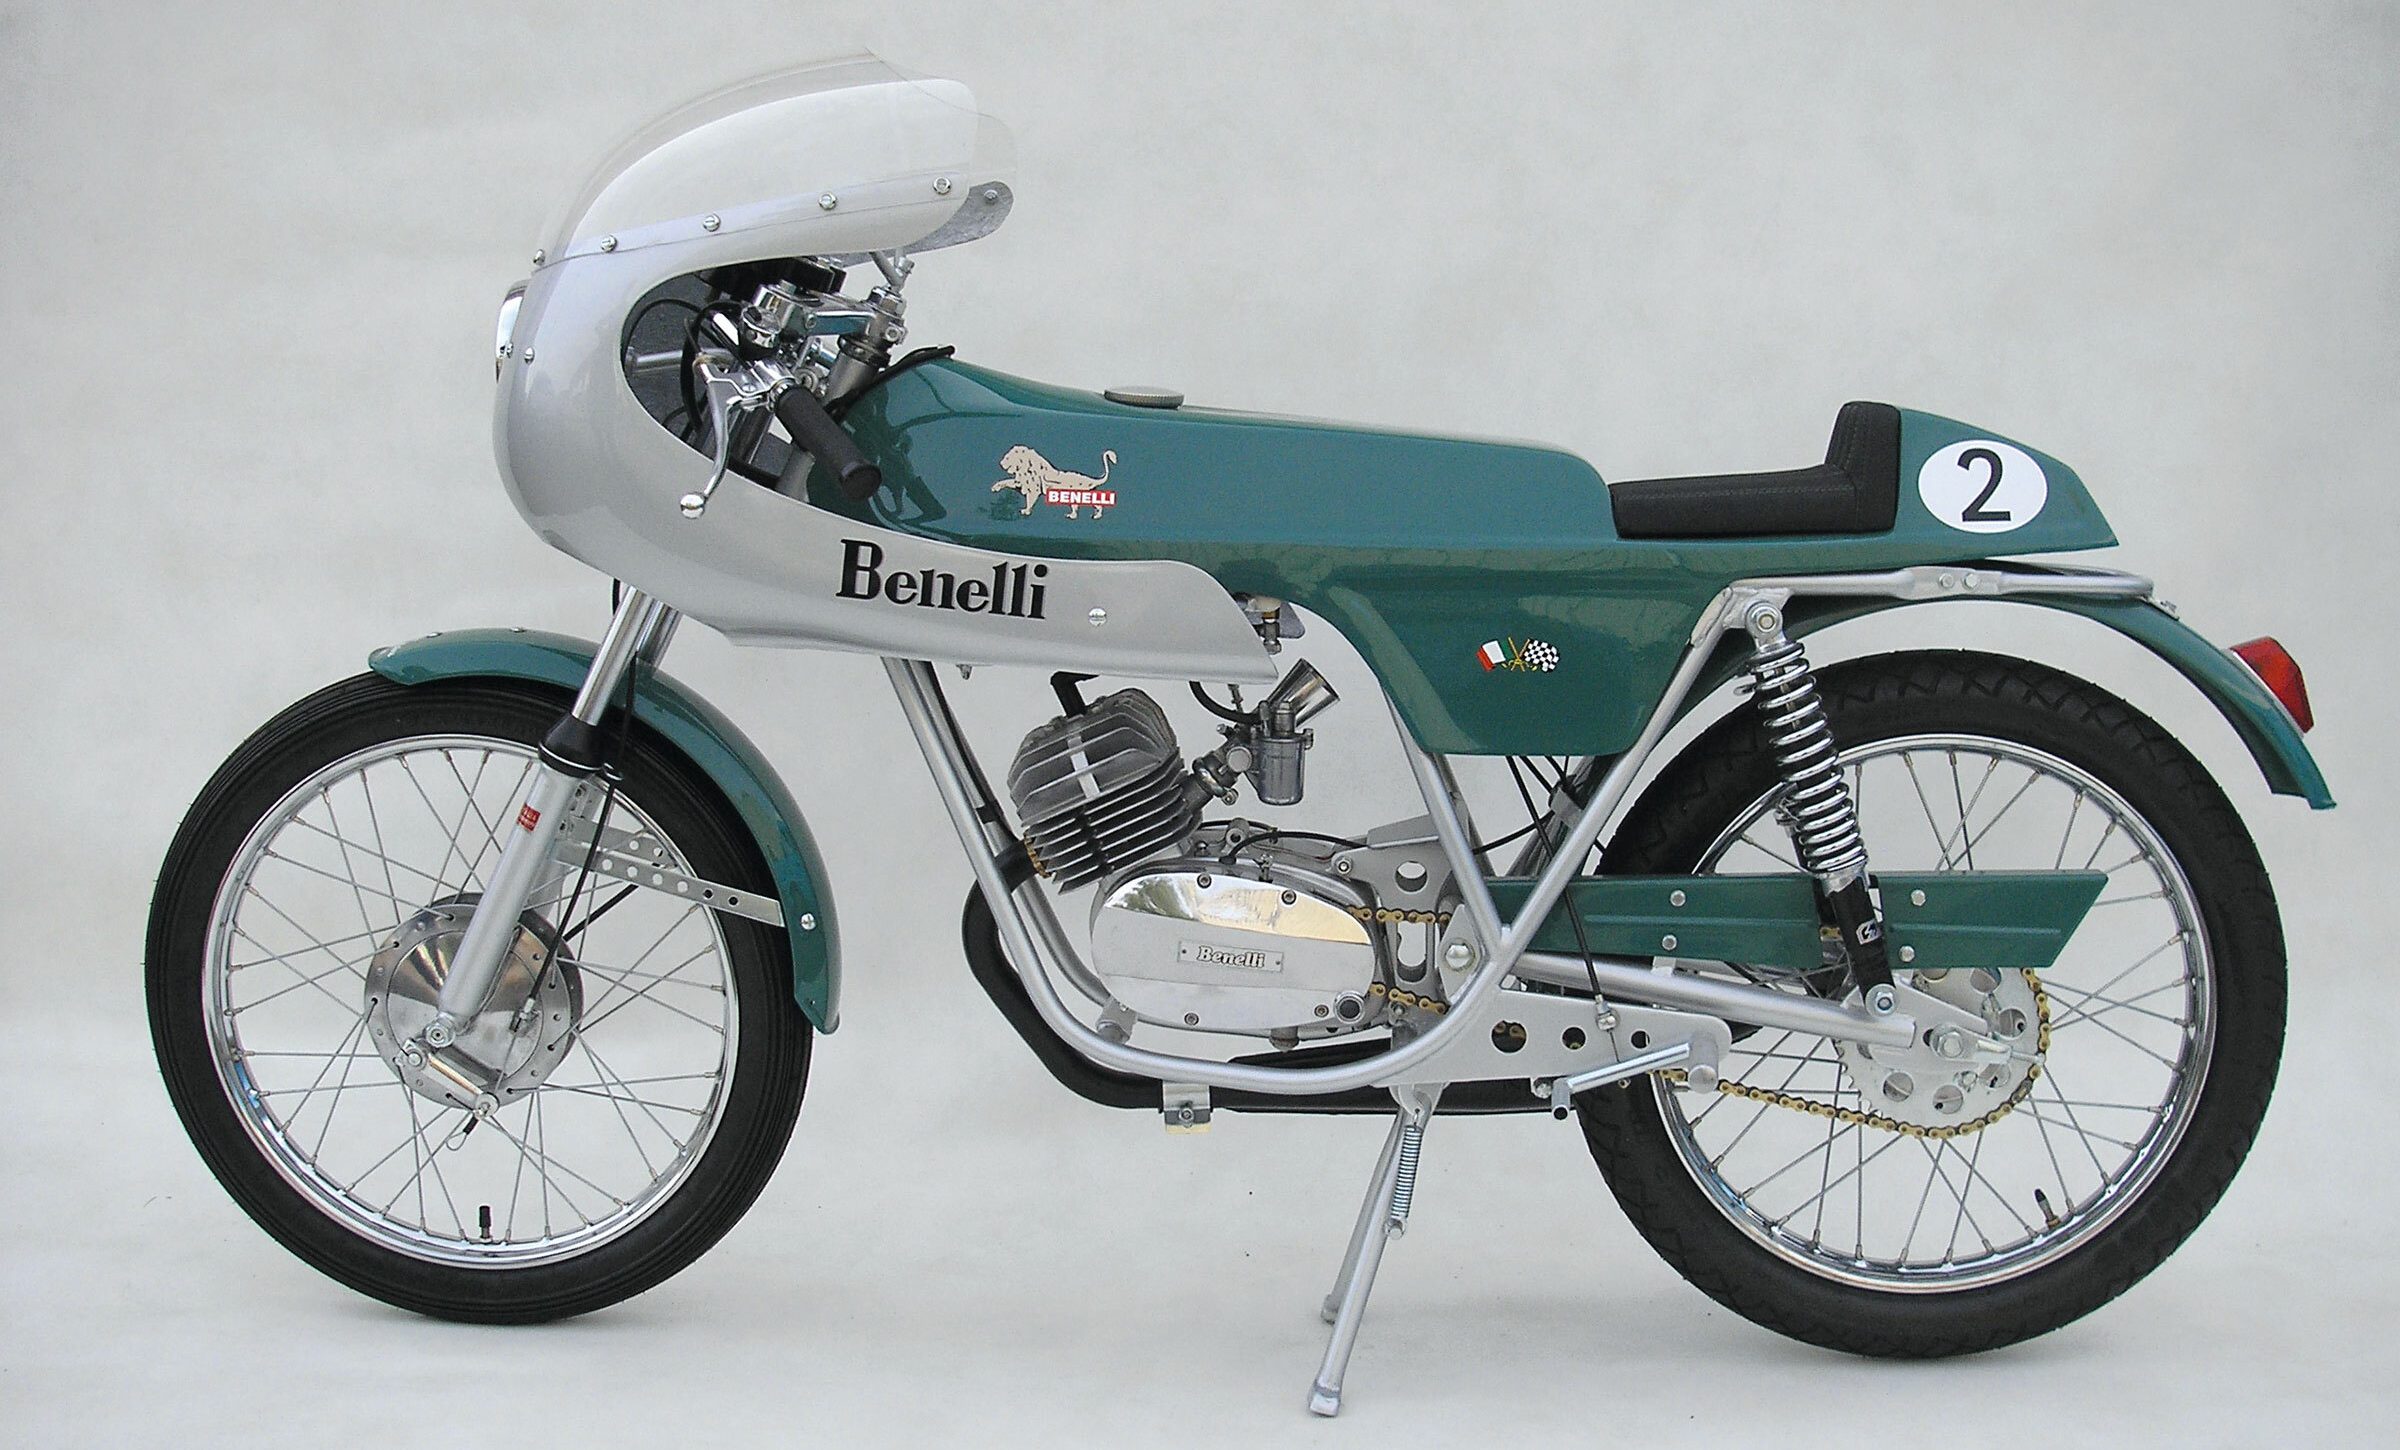 Benelli cafe racer 2